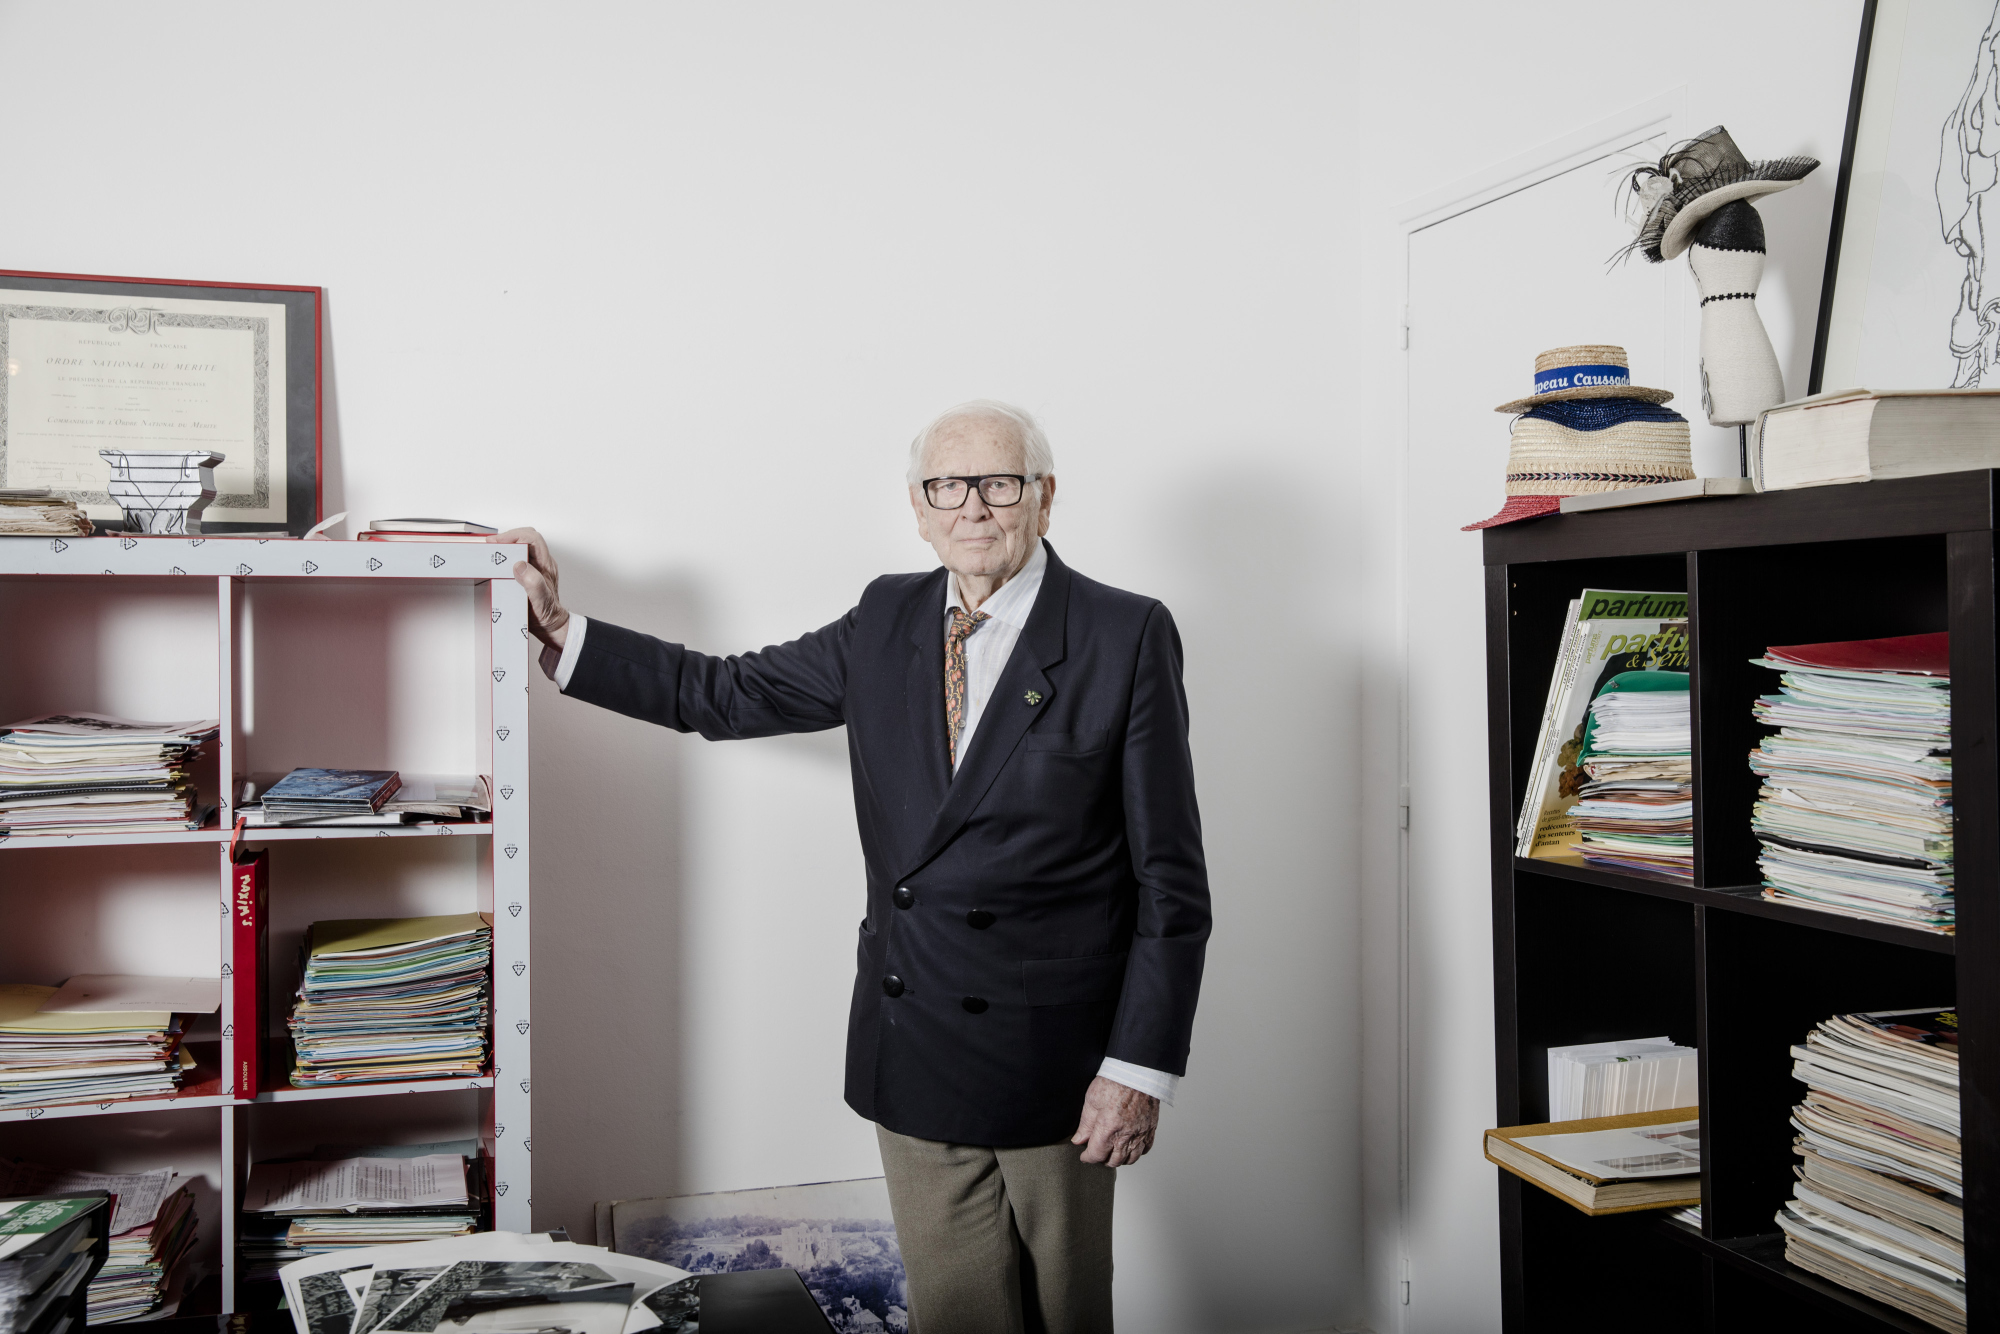 French-Italian fashion designer, Pierre Cardin has died at the age